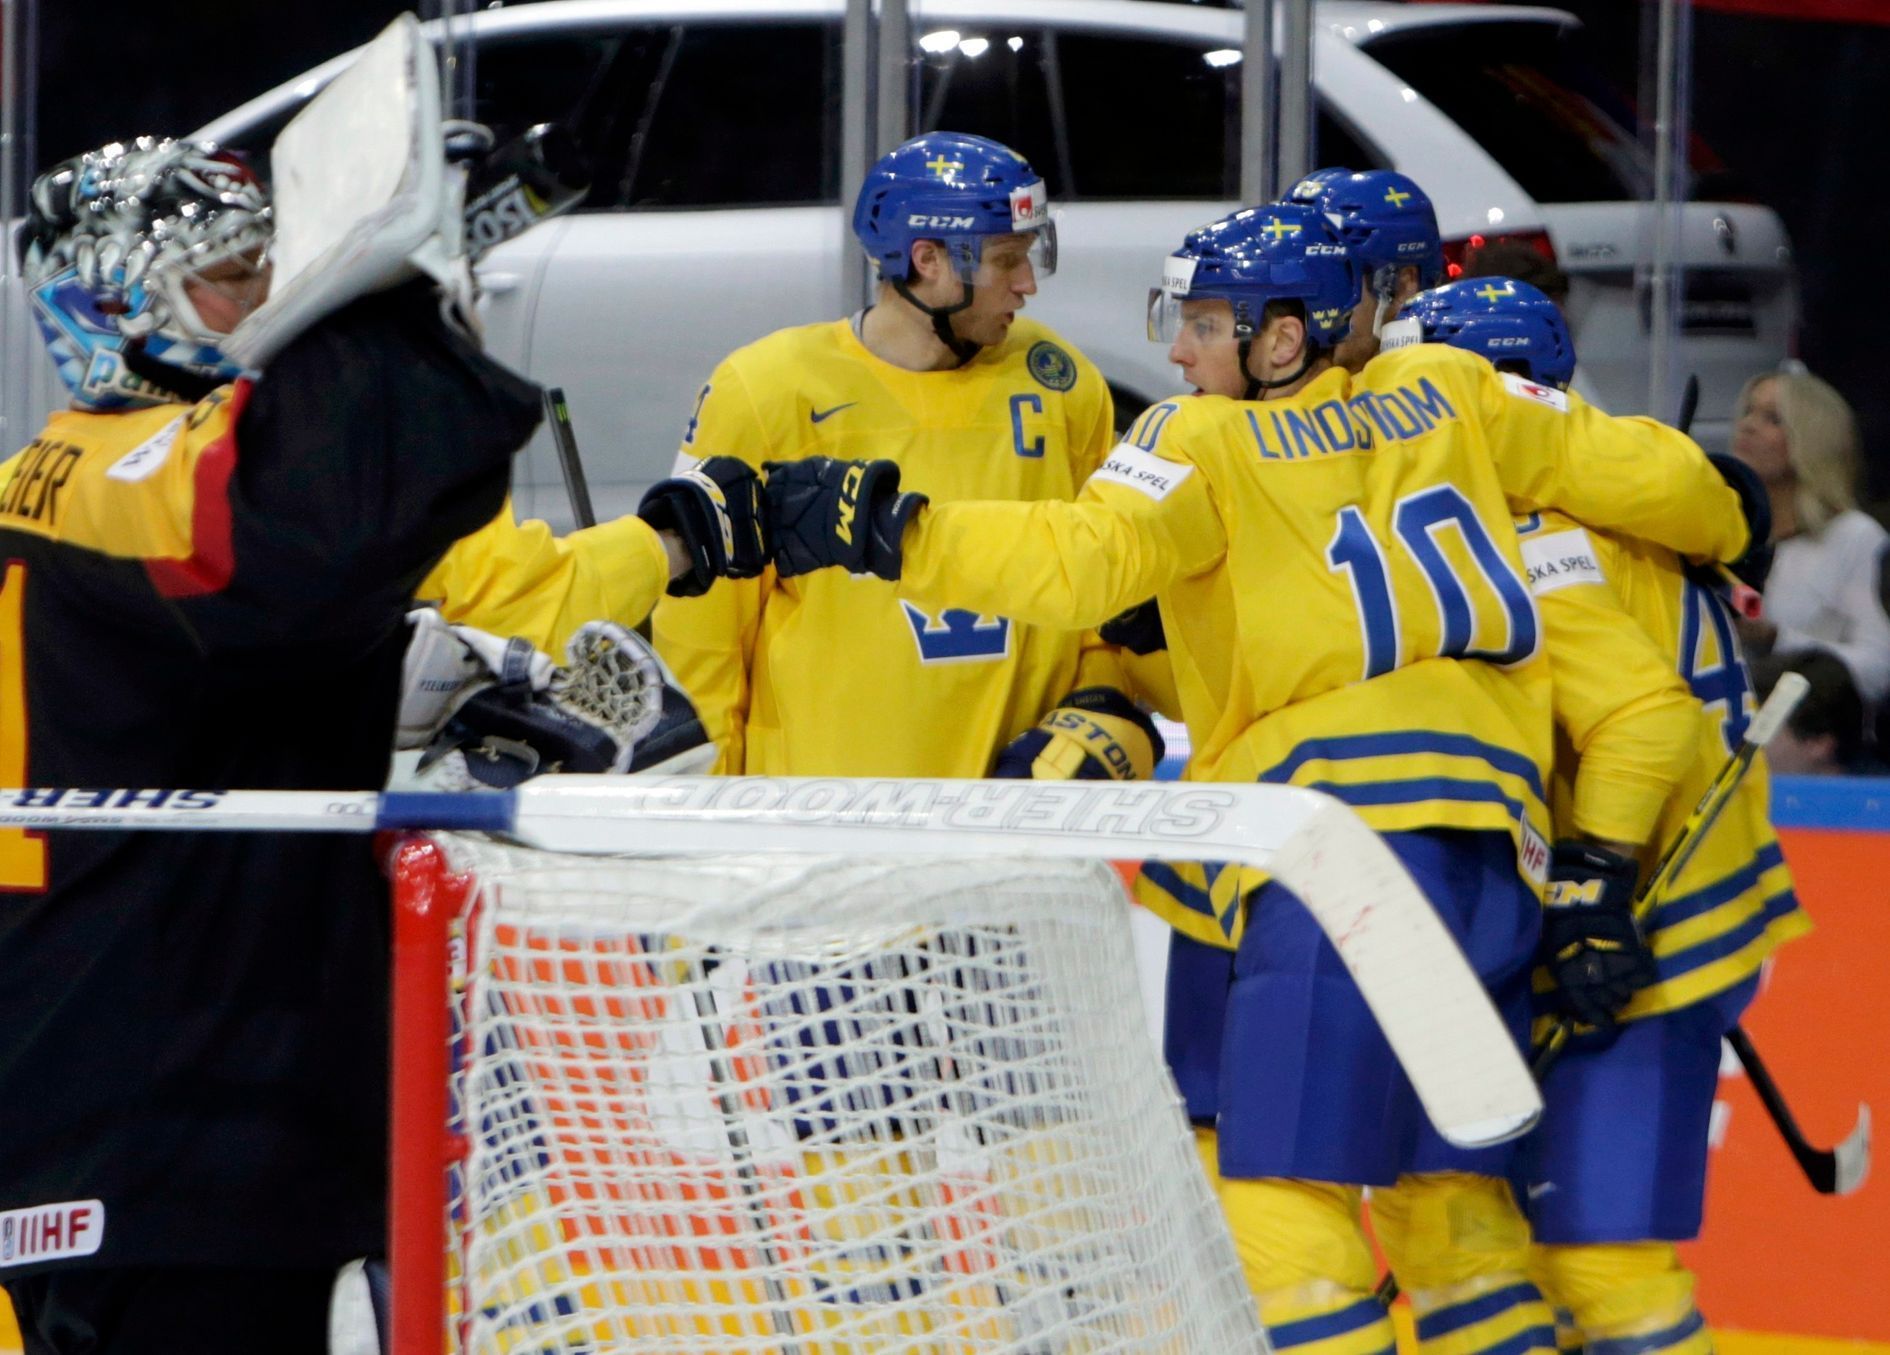 Sweden's Moller celebrates scoring a goal with team mates during their Ice Hockey World Championship game against Germany in Prague